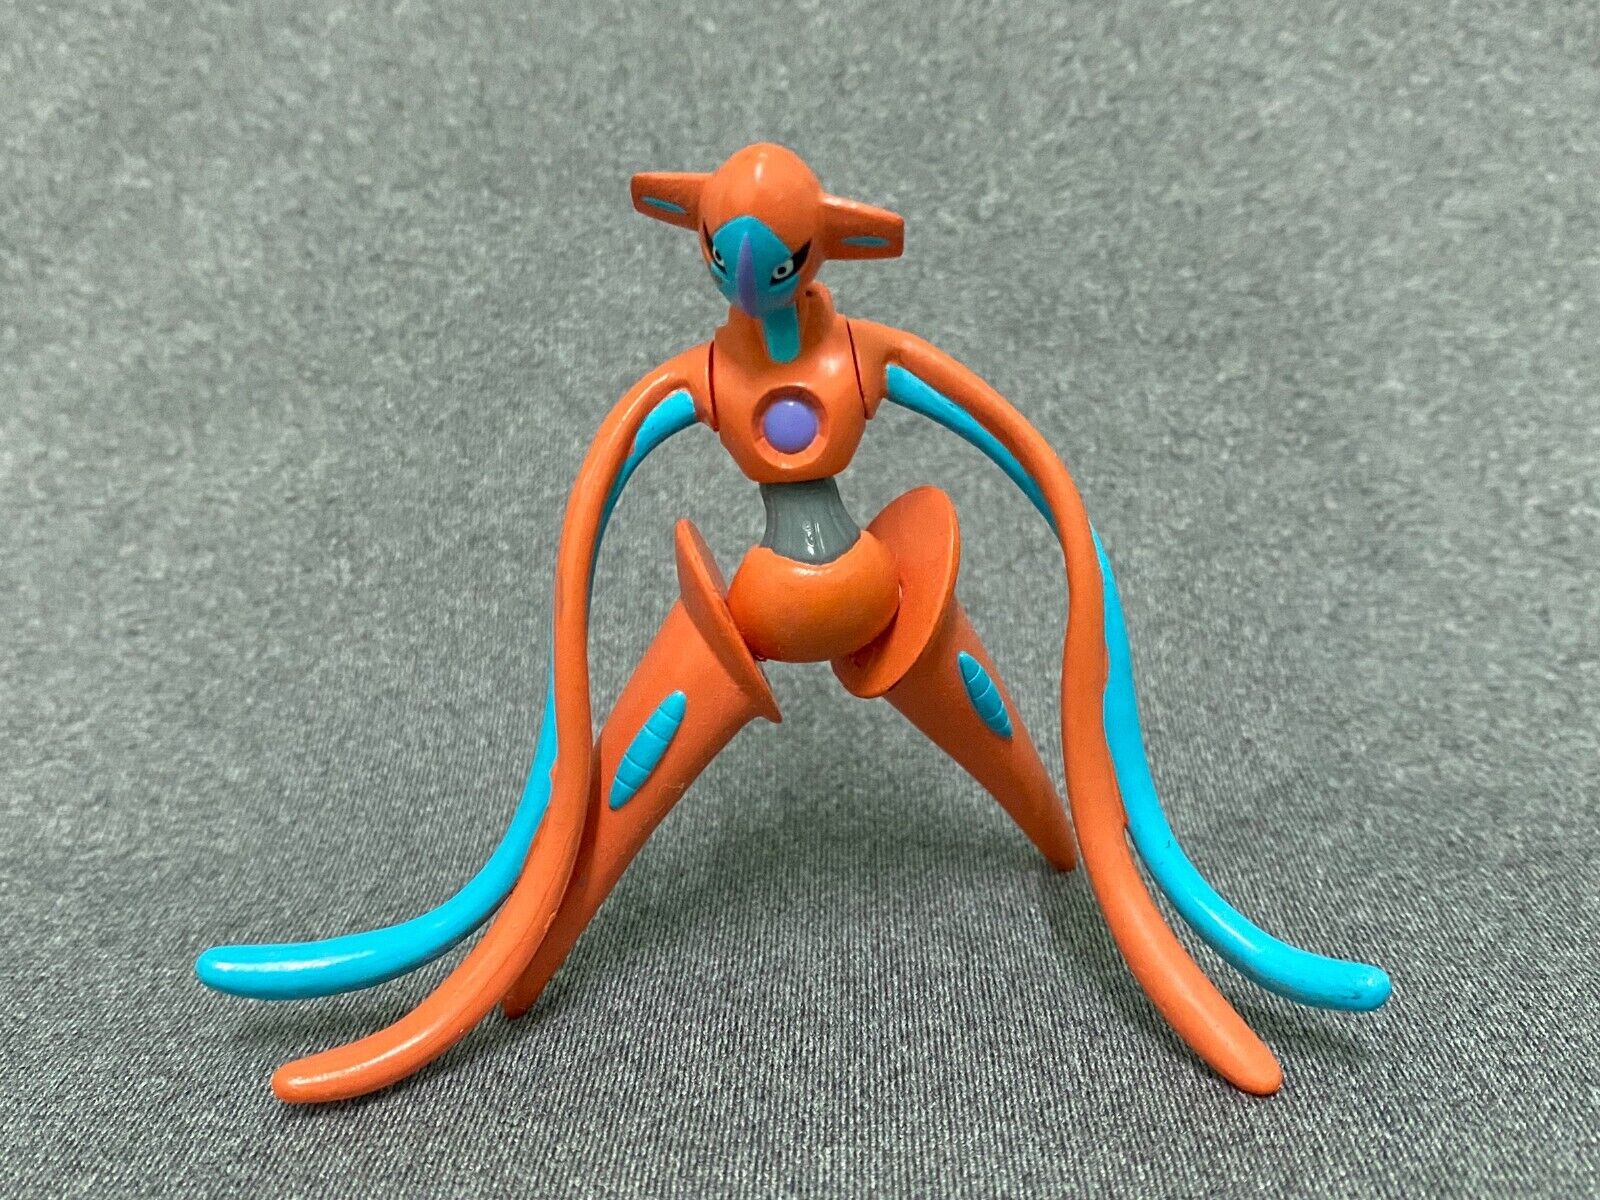 Deoxys Pokemon monster Figure Bandai Action Gashapon Collection Toy.